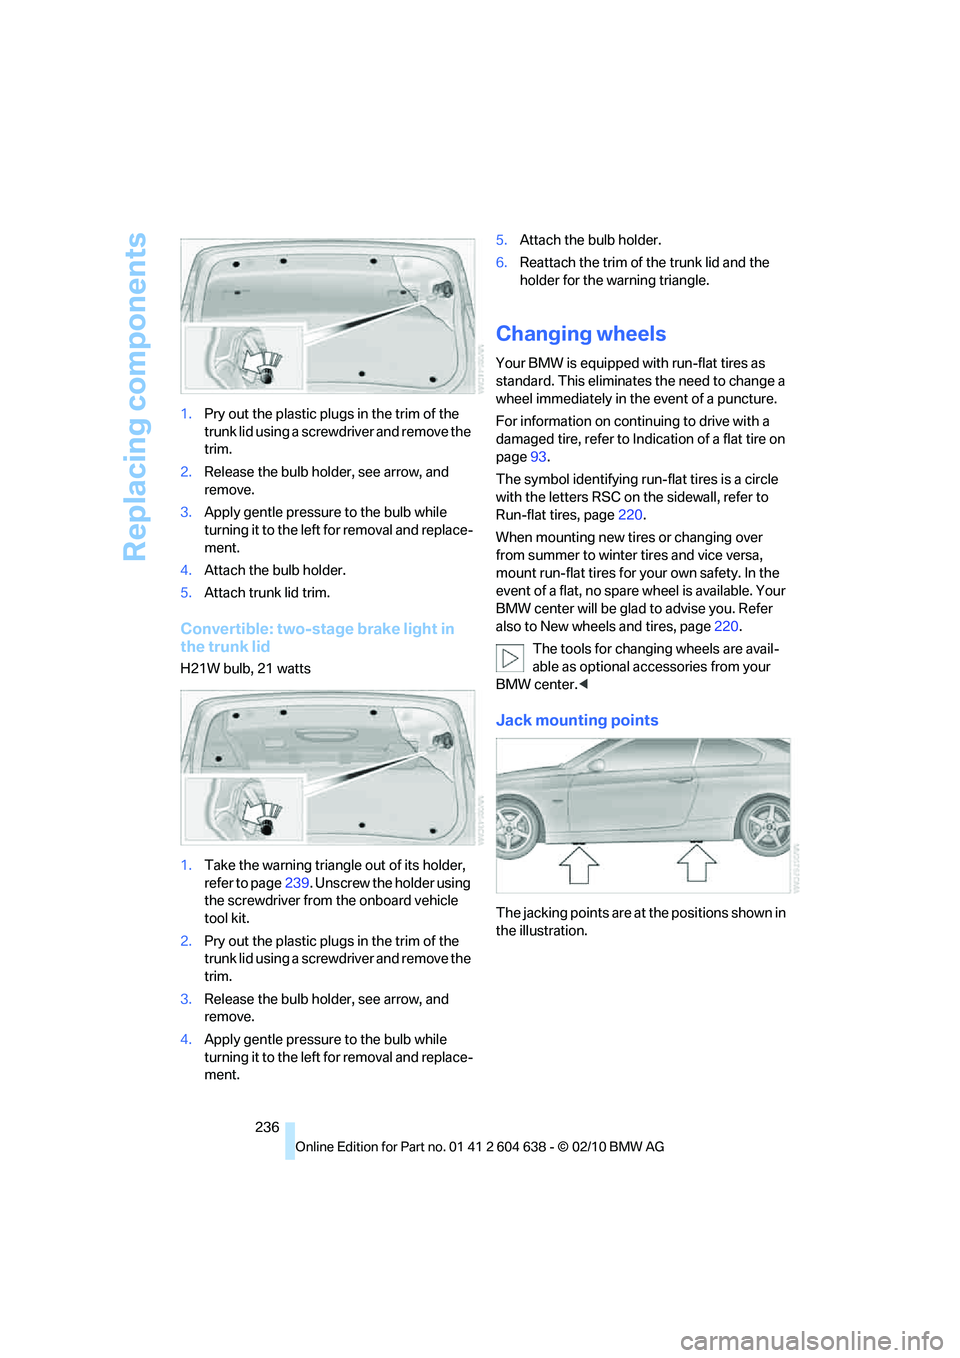 BMW M3 CONVERTIBLE 2011  Owners Manual Replacing components
236 1.Pry out the plastic plugs in the trim of the 
trunk lid using a screwdriver and remove the 
trim.
2.Release the bulb holder, see arrow, and 
remove.
3.Apply gentle pressure 